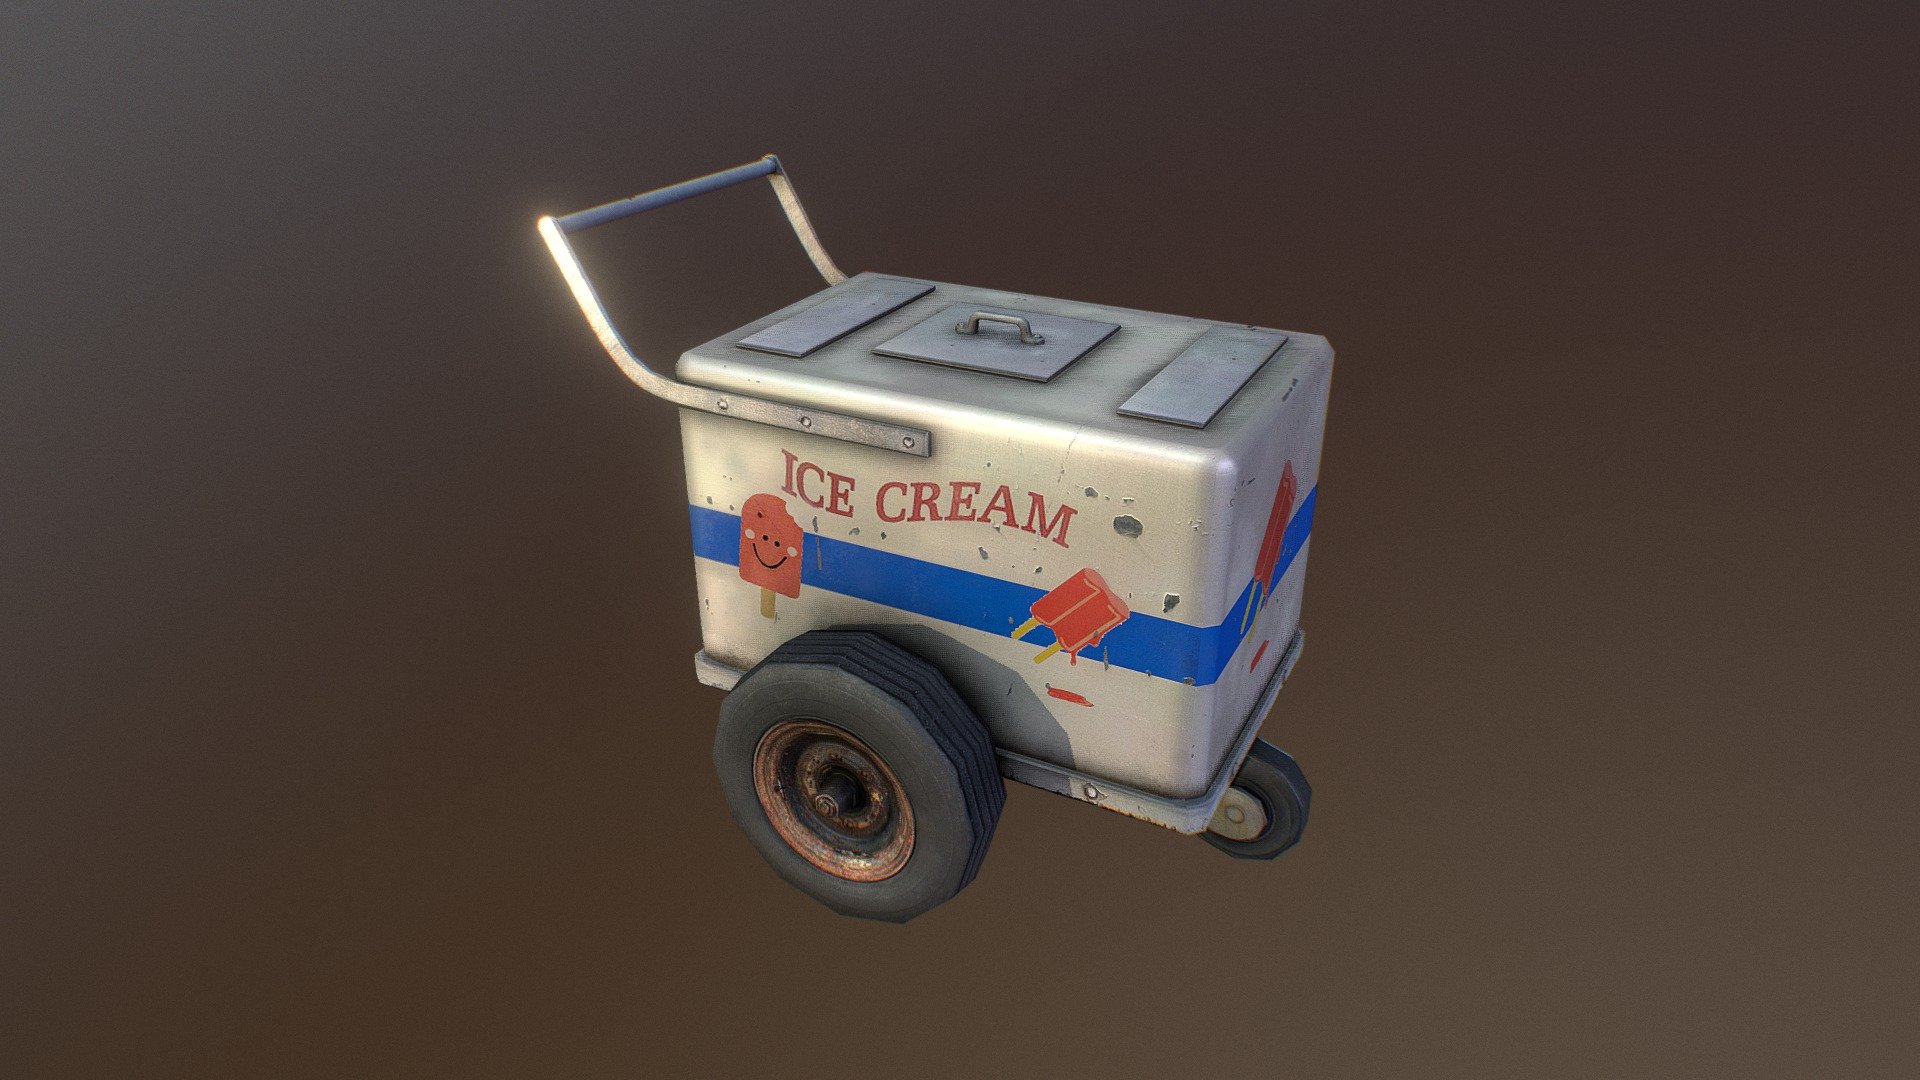 Popsicle Cart made in blender 2.7x,  photoshop CS2 and MindTex 1.0

http://cgtrain.mata.com.mx - Popsicle Cart - Buy Royalty Free 3D model by CGTrain (@SalvadorMata) 3d model